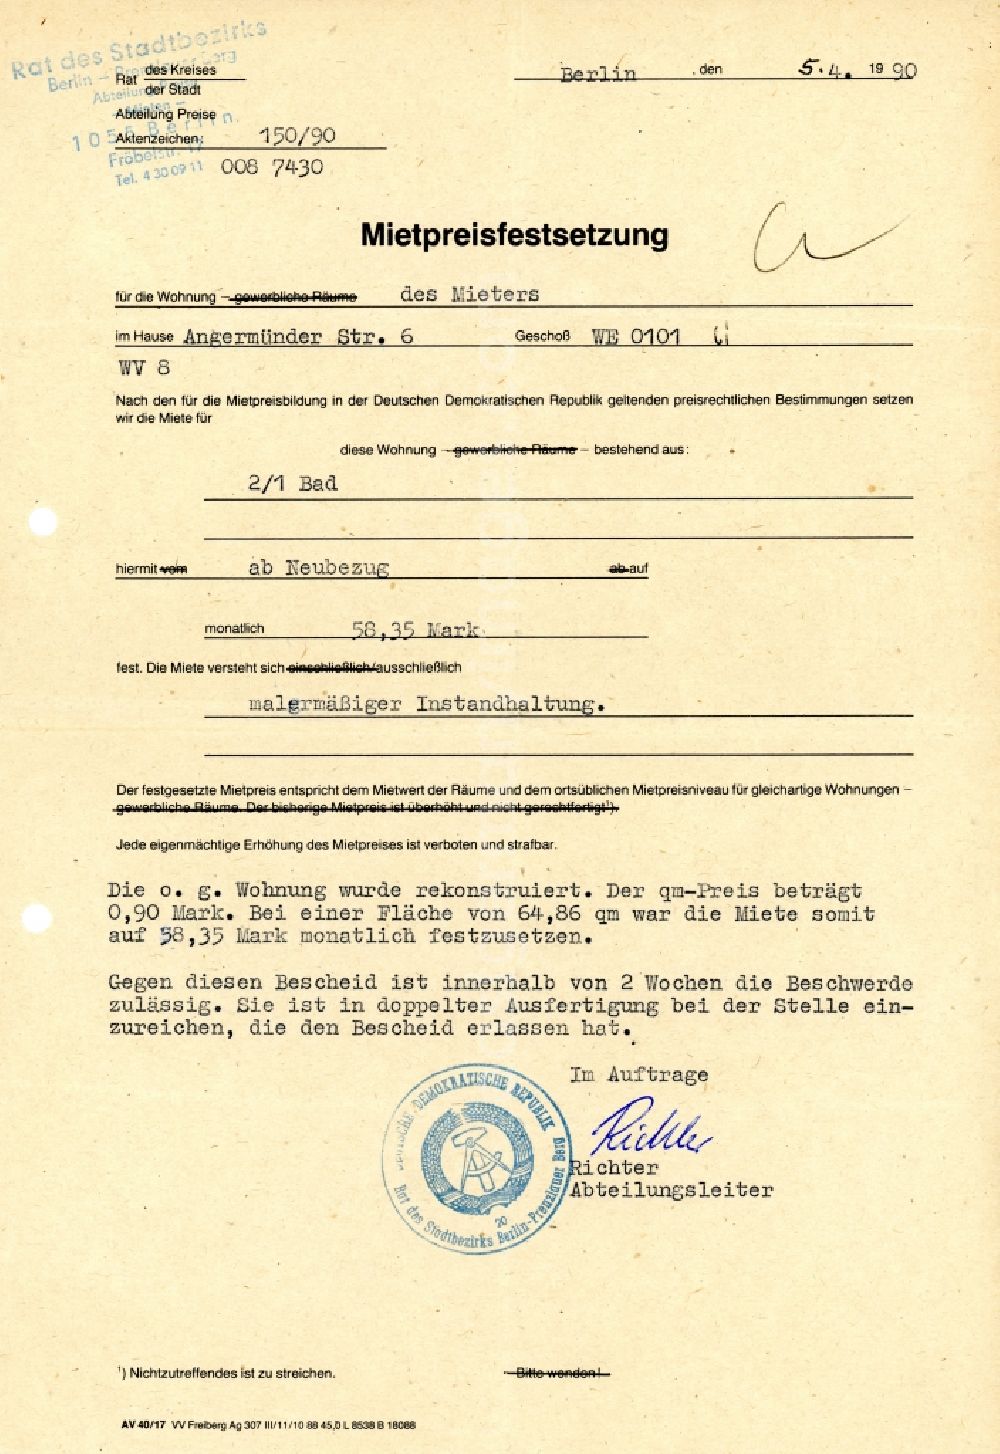 GDR image archive: Berlin - Reproduction Wohnungsmietvertrag und Mietpreisfestsetzung issued in the district Prenzlauer Berg in Berlin, the former capital of the GDR, German Democratic Republic